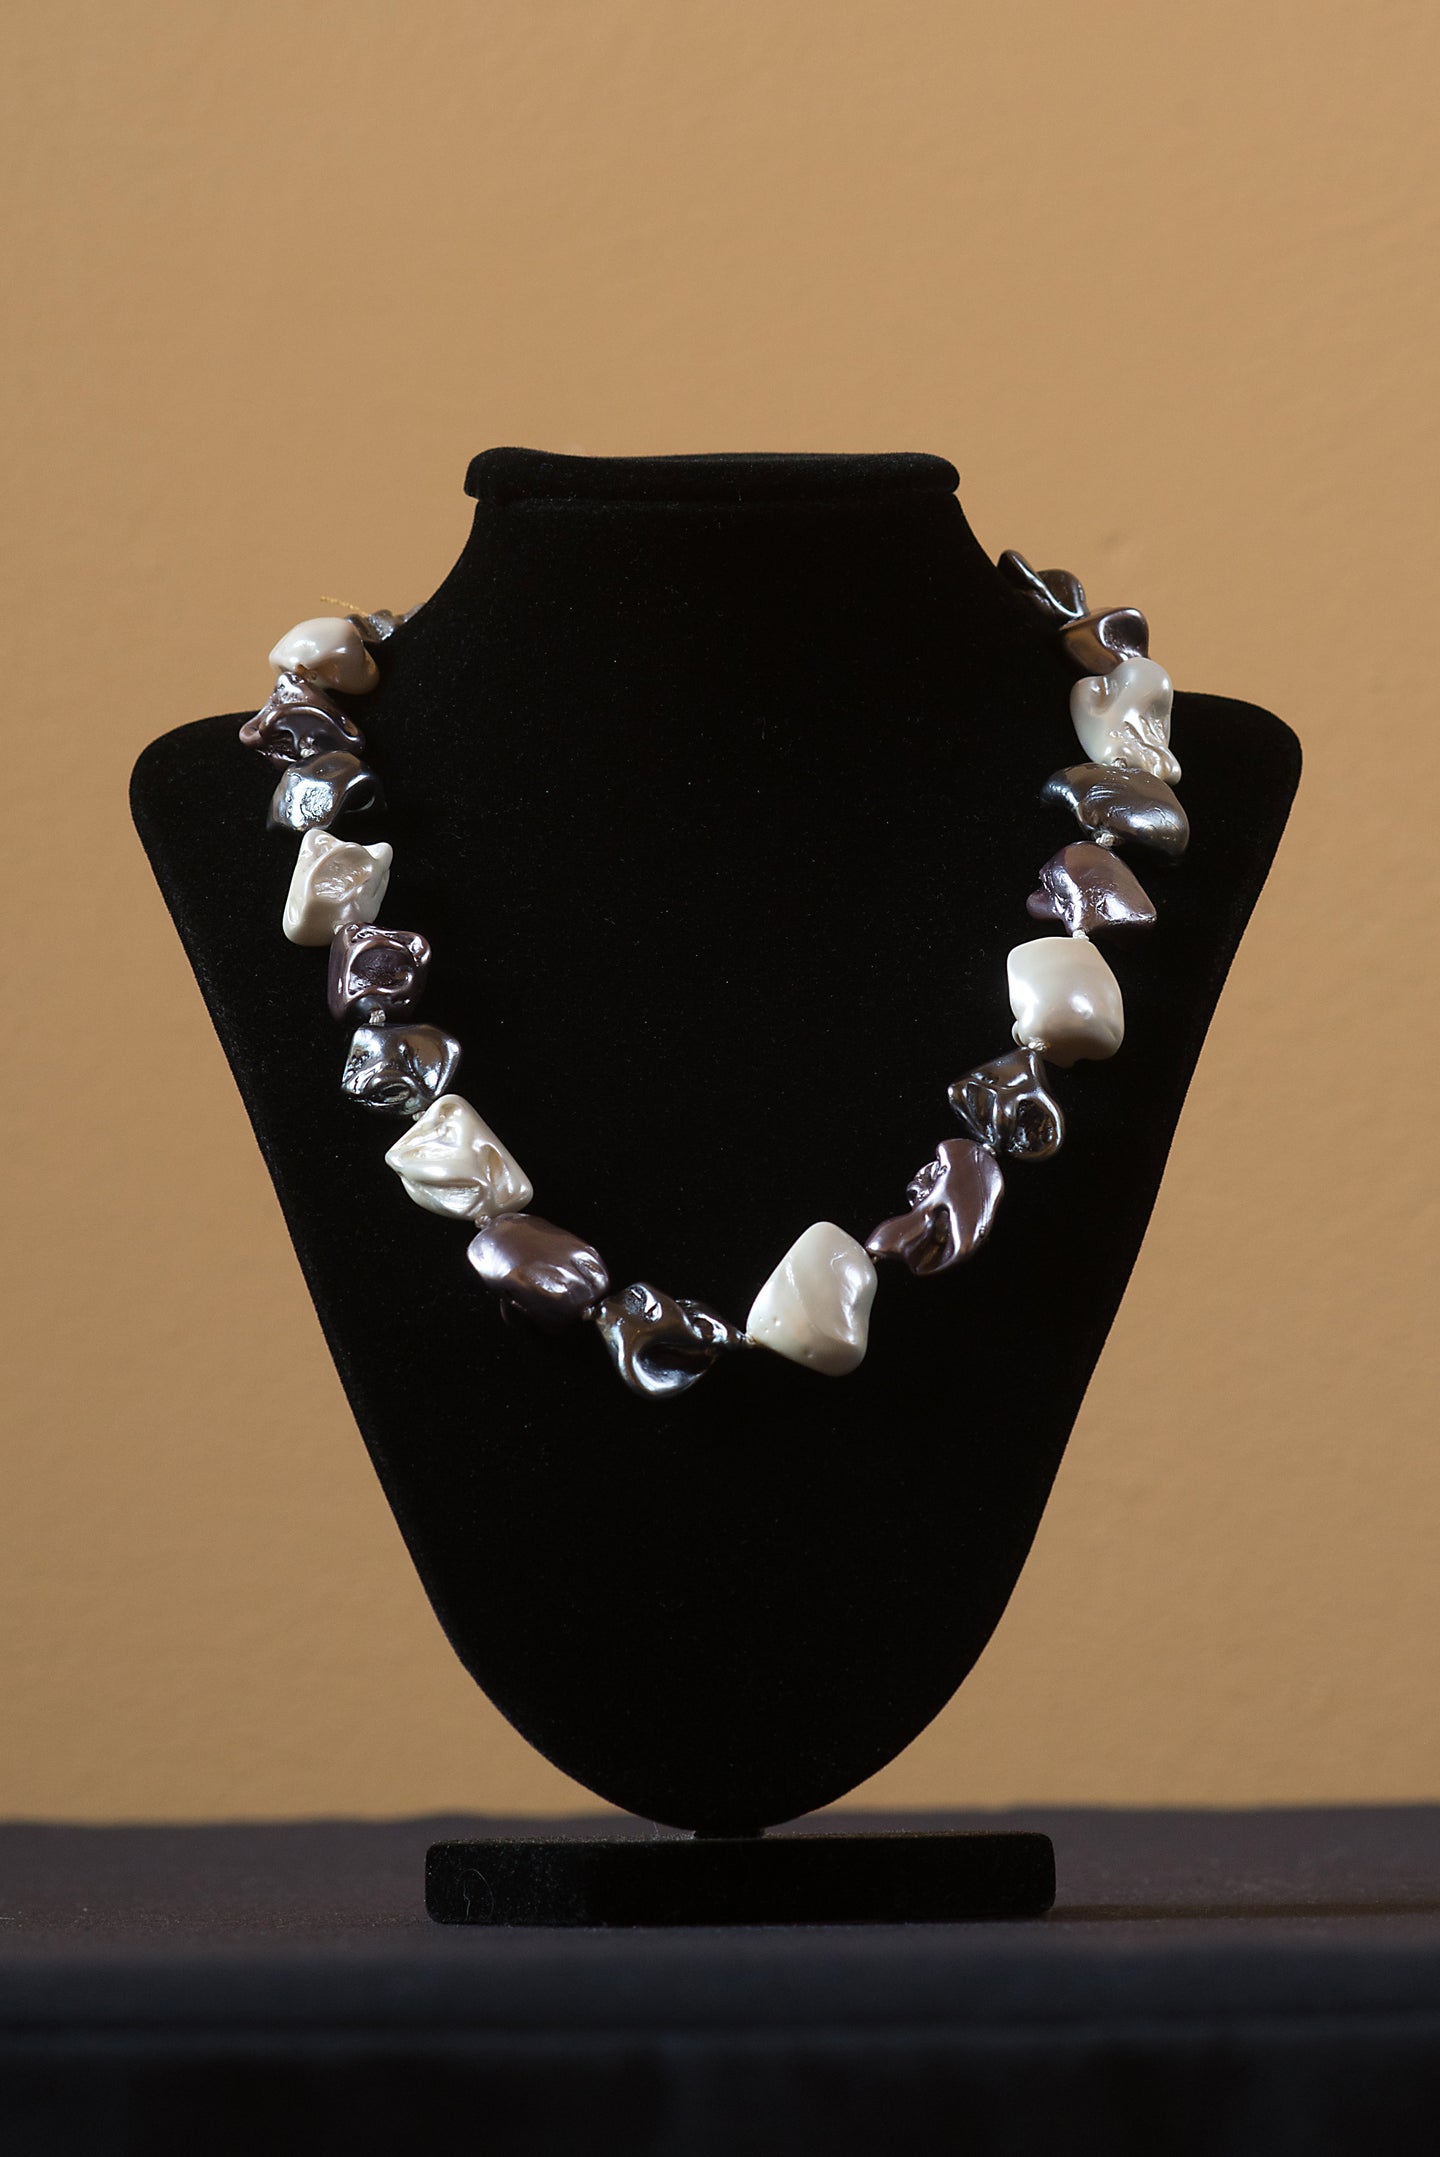 Necklace - Silver, White, Metallic Shell Pearls